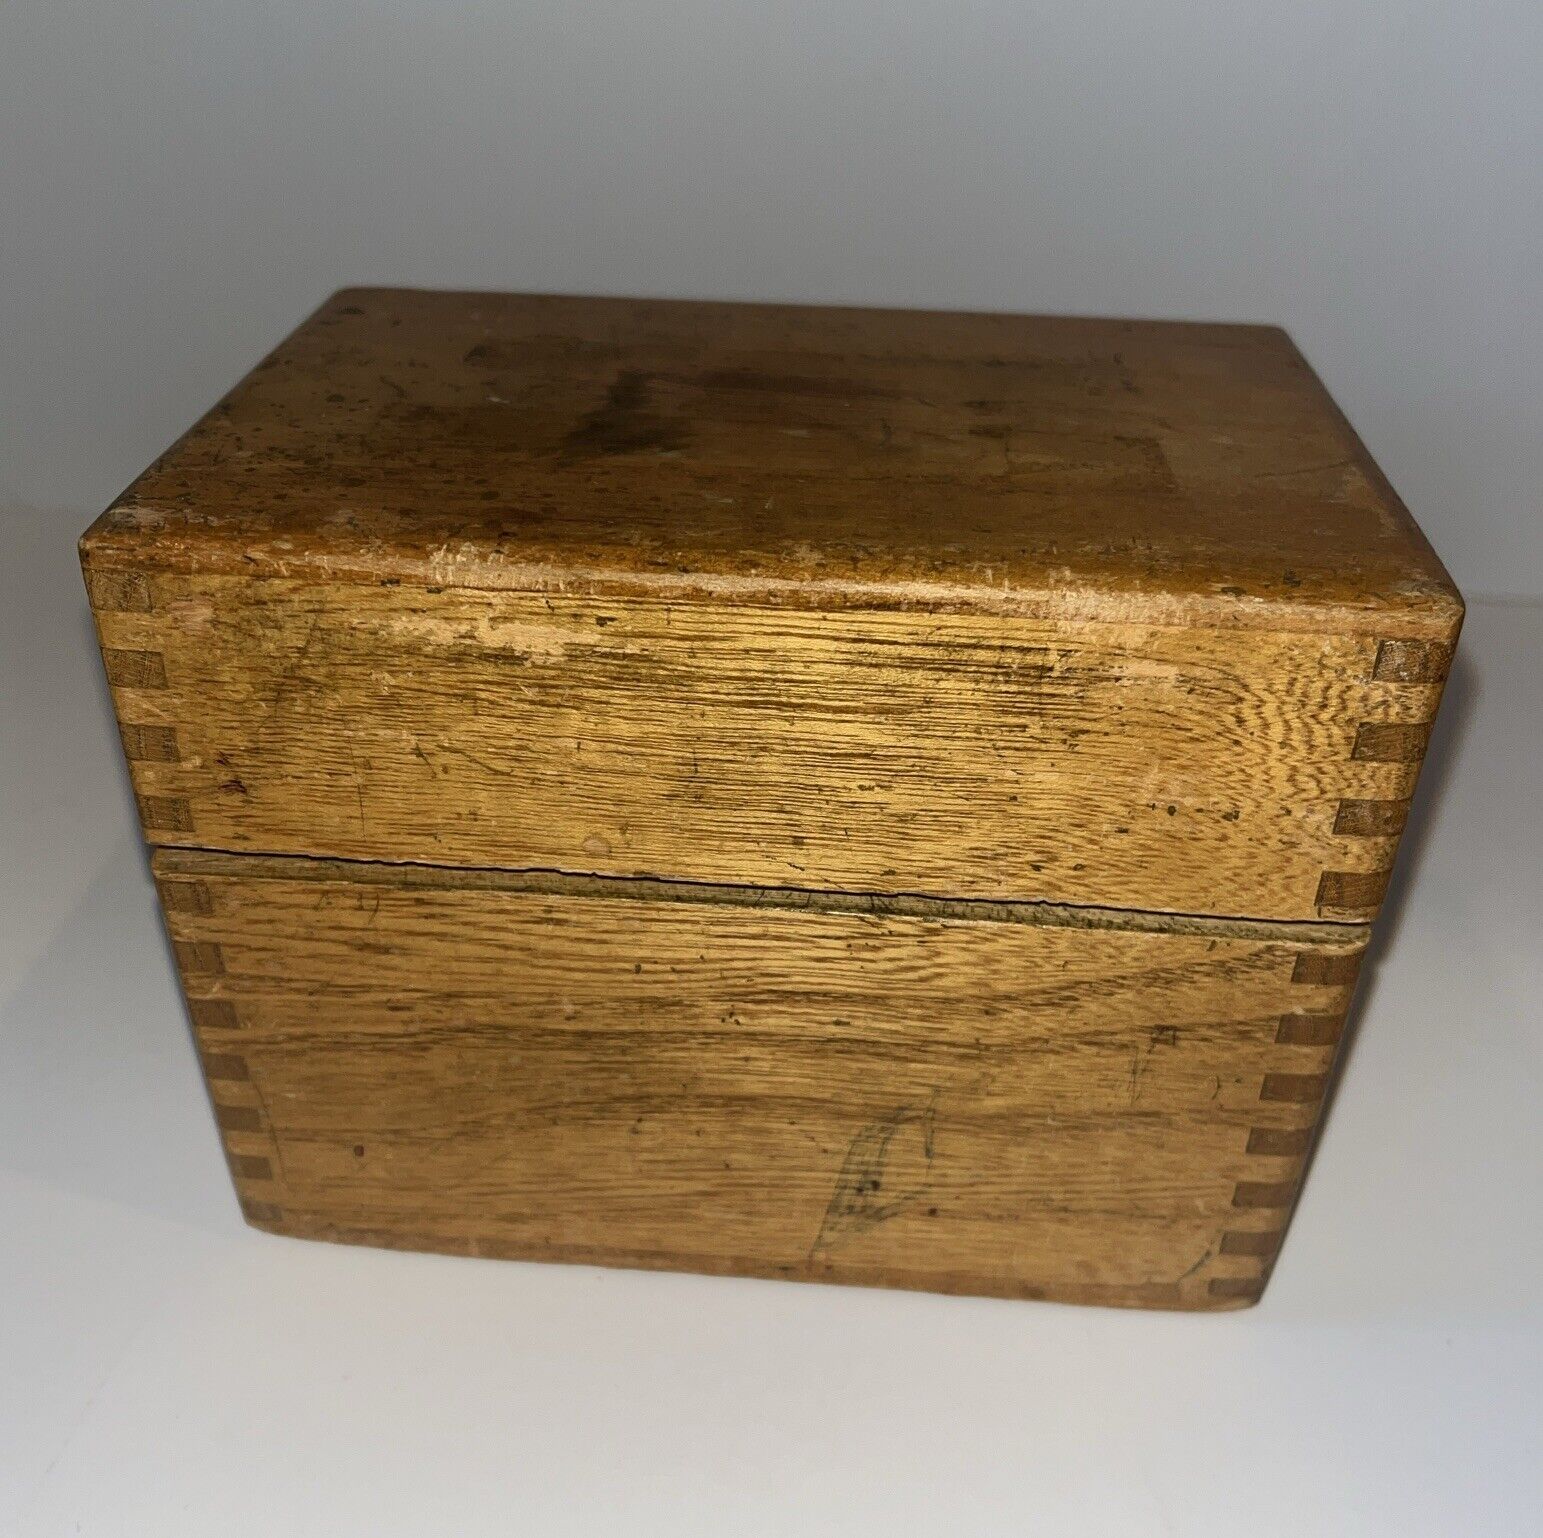 Vintage 1963 Oak Wooden Recipe File Index Card Box Hinged Lid Dovetailed Joints